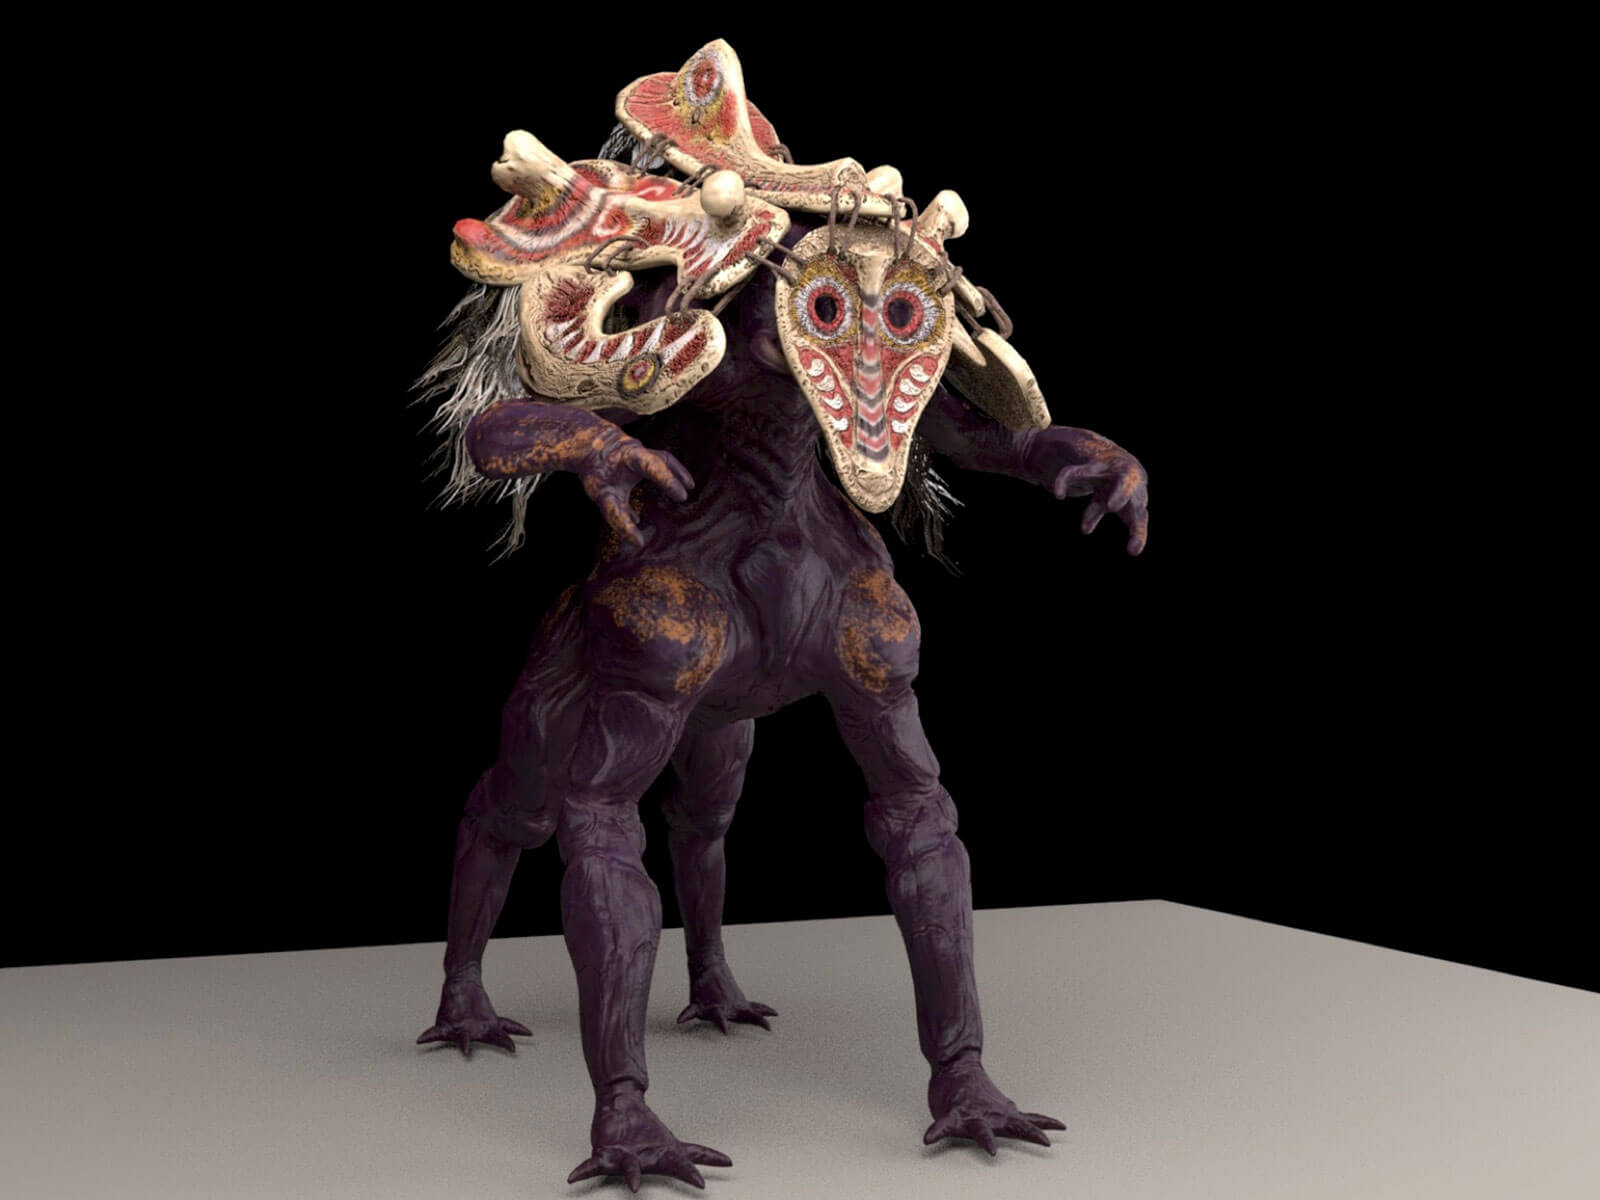 Monster covered in decorated bone masks